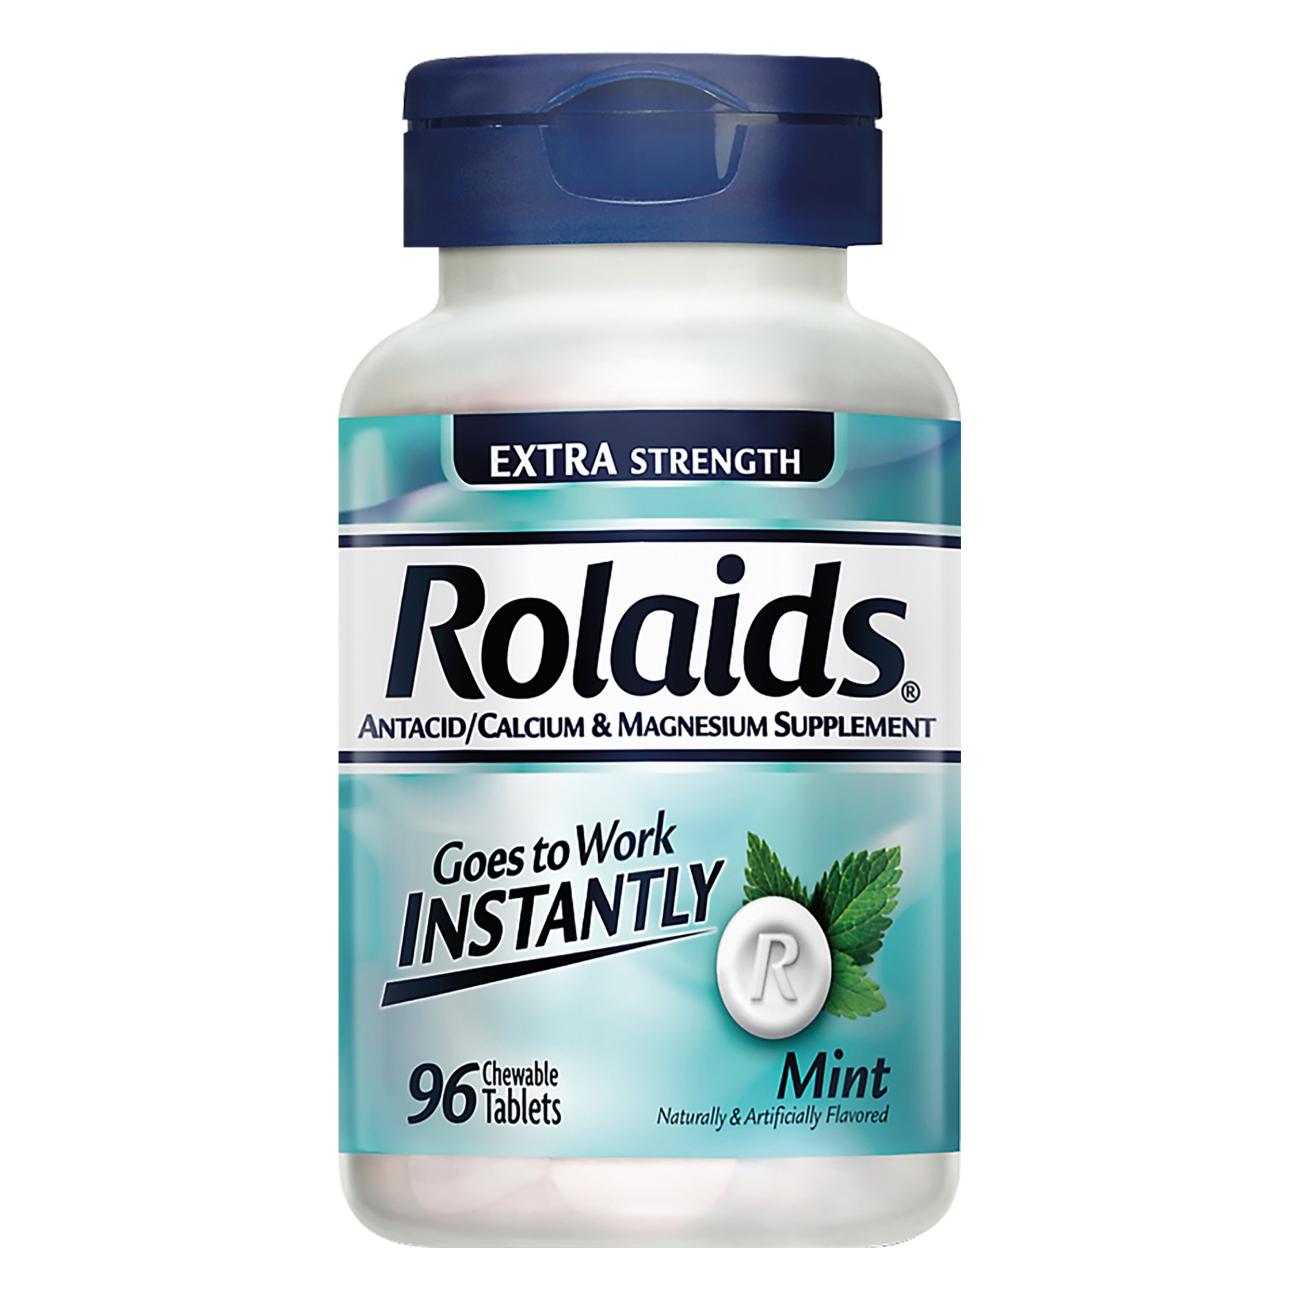 Rolaids Extra Strength Antacid Tablets Mint; image 1 of 6